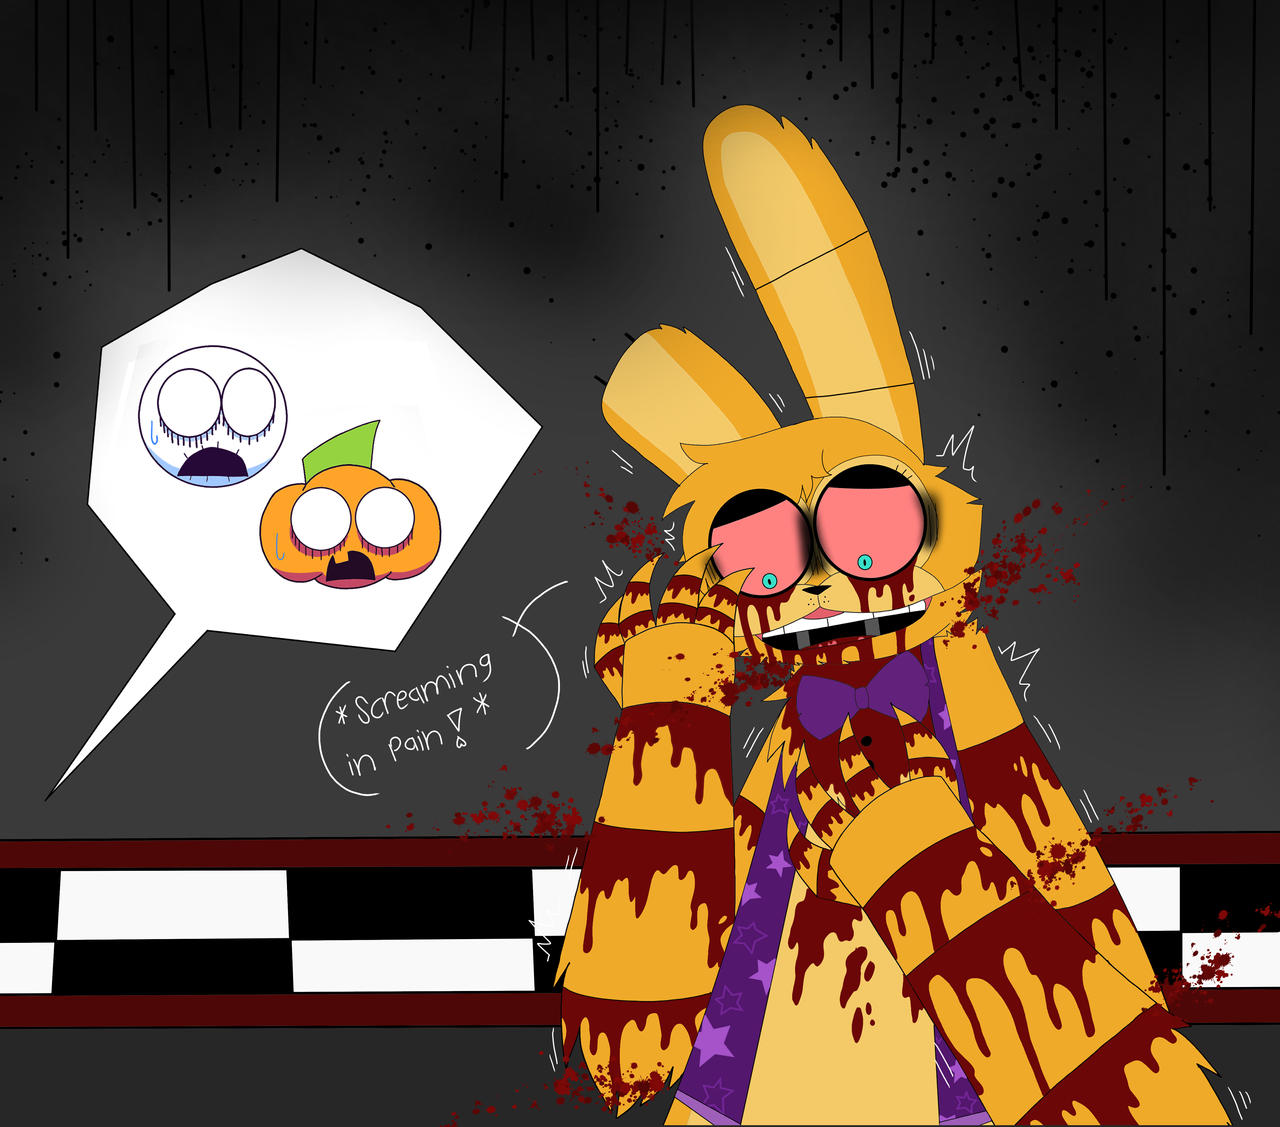 FNAF What If Abby Died in the FNAF Movie? by CinTanGallery on DeviantArt